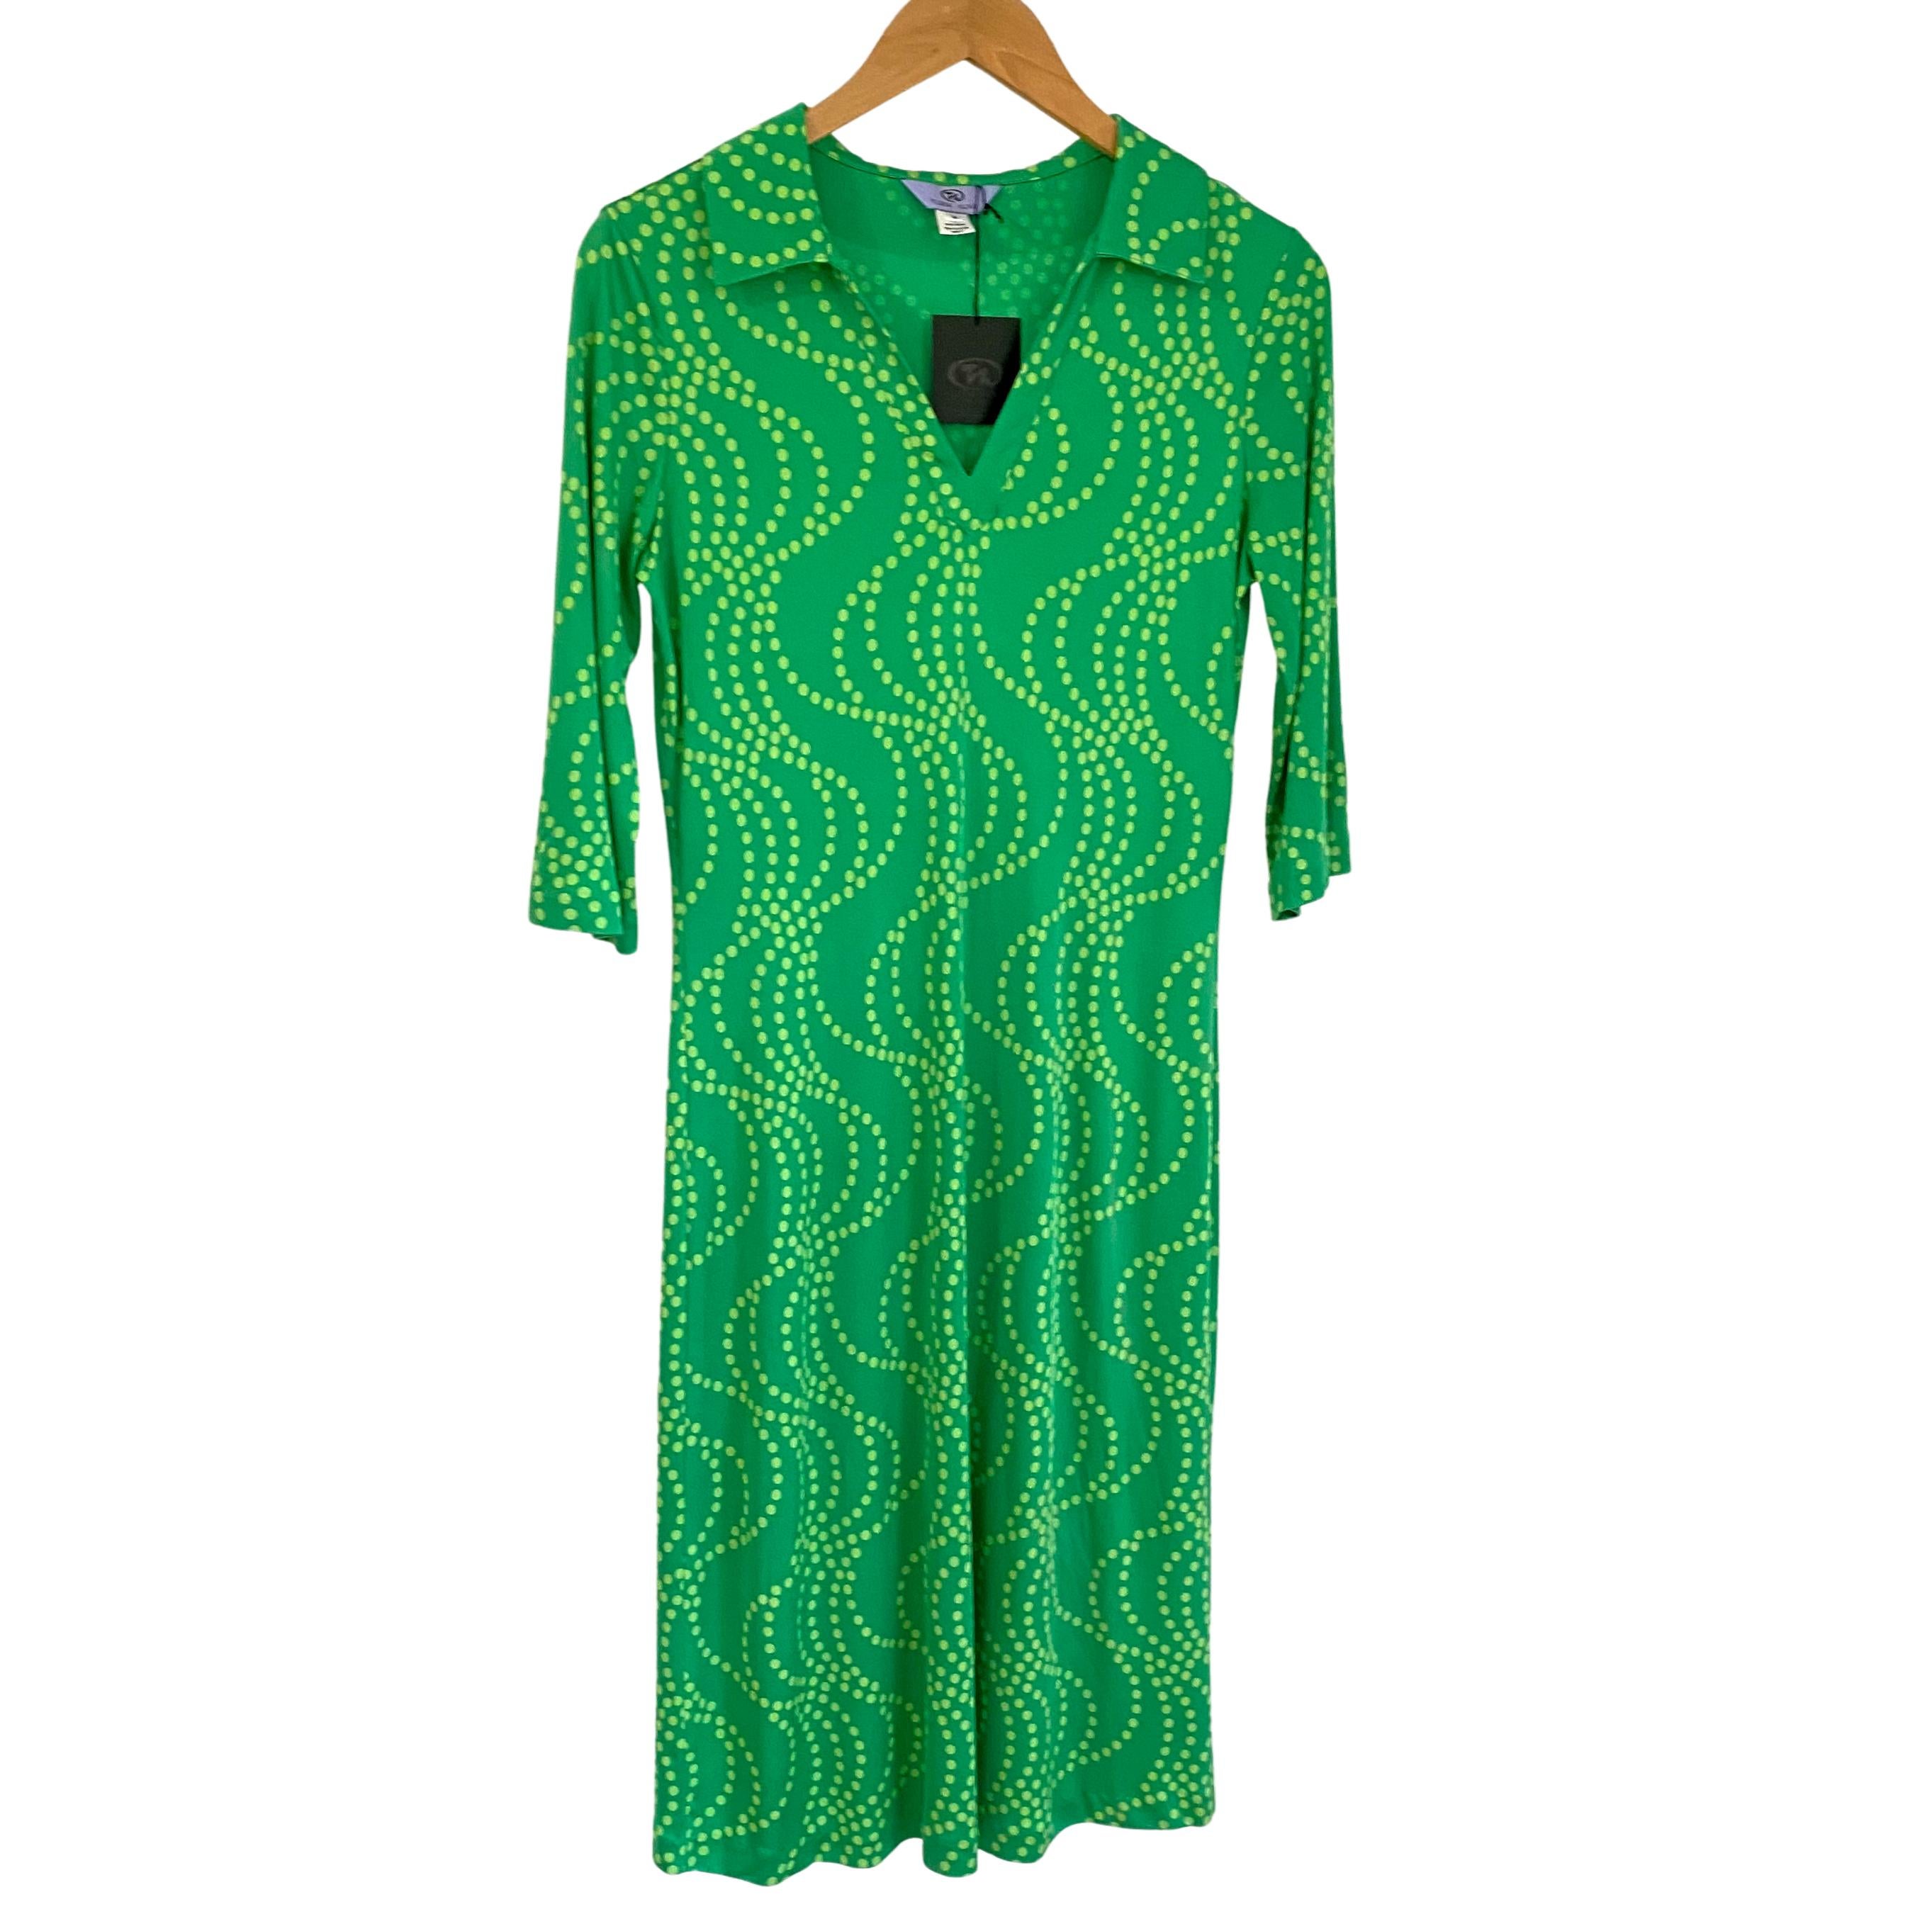 Cool chic polo dress with 3/4 sleeves in green buttery silk jersey.
Authentic FLORA KUNG silk dresses are made in premiere quality, long-filament silk yarn which gives a natural simmering glow and a buttery, luxurious feel. 
US 2 = UK 6 = French